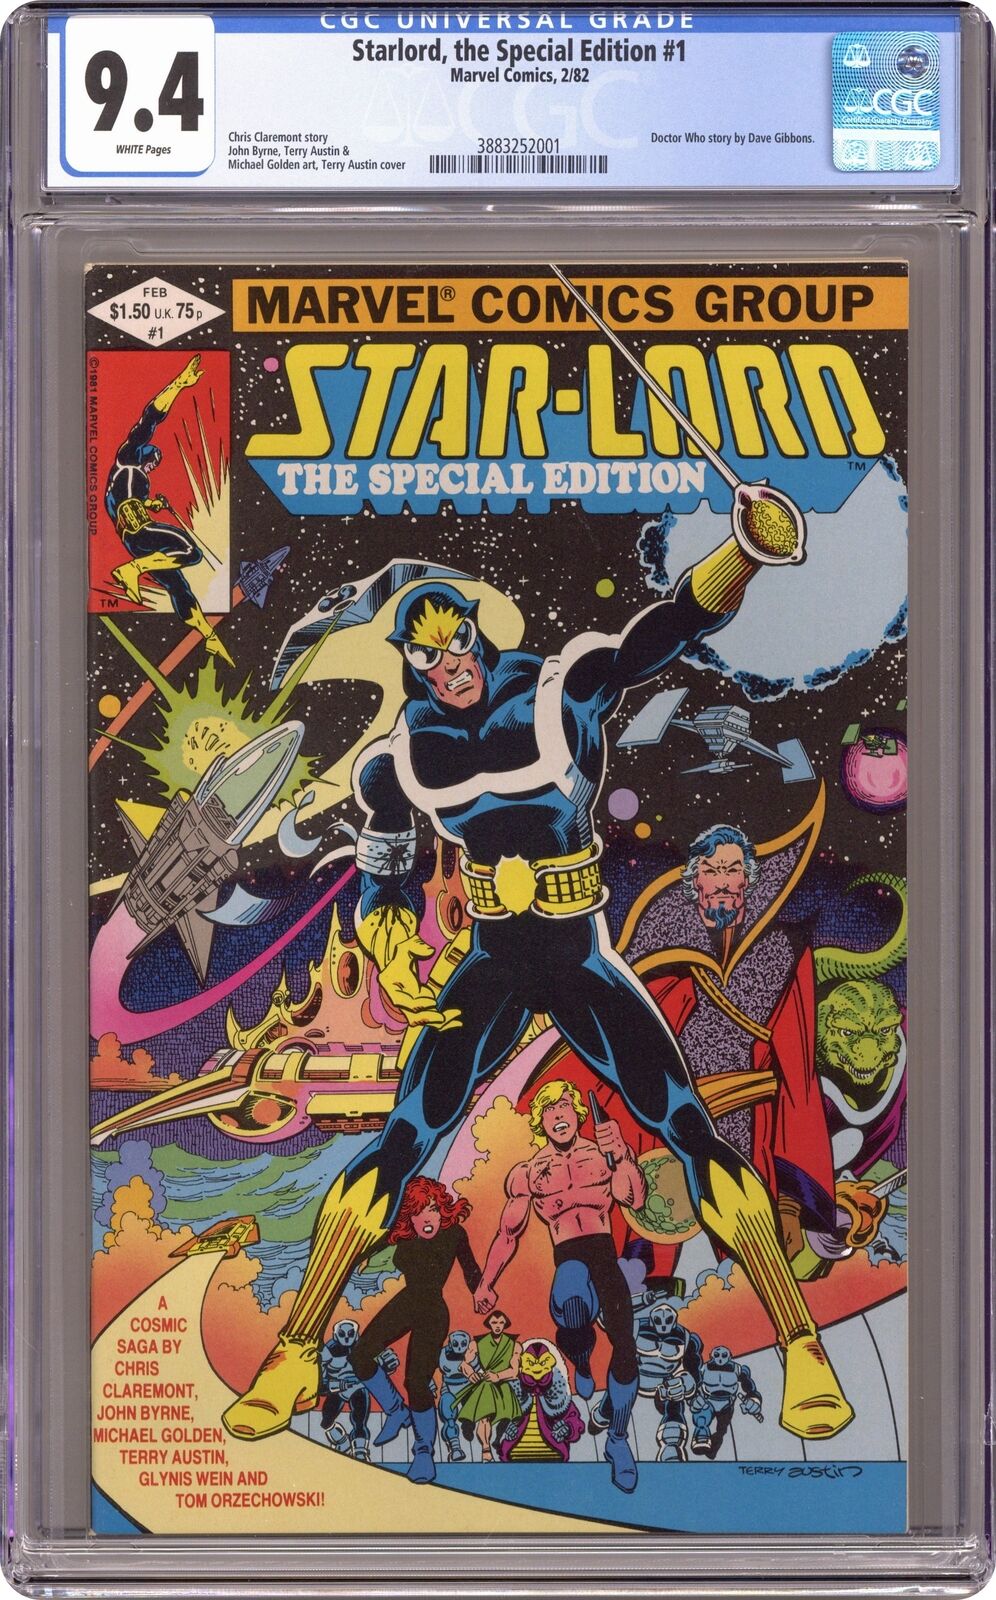 Starlord The Special Edition #1 CGC 9.4 1982 3883252001